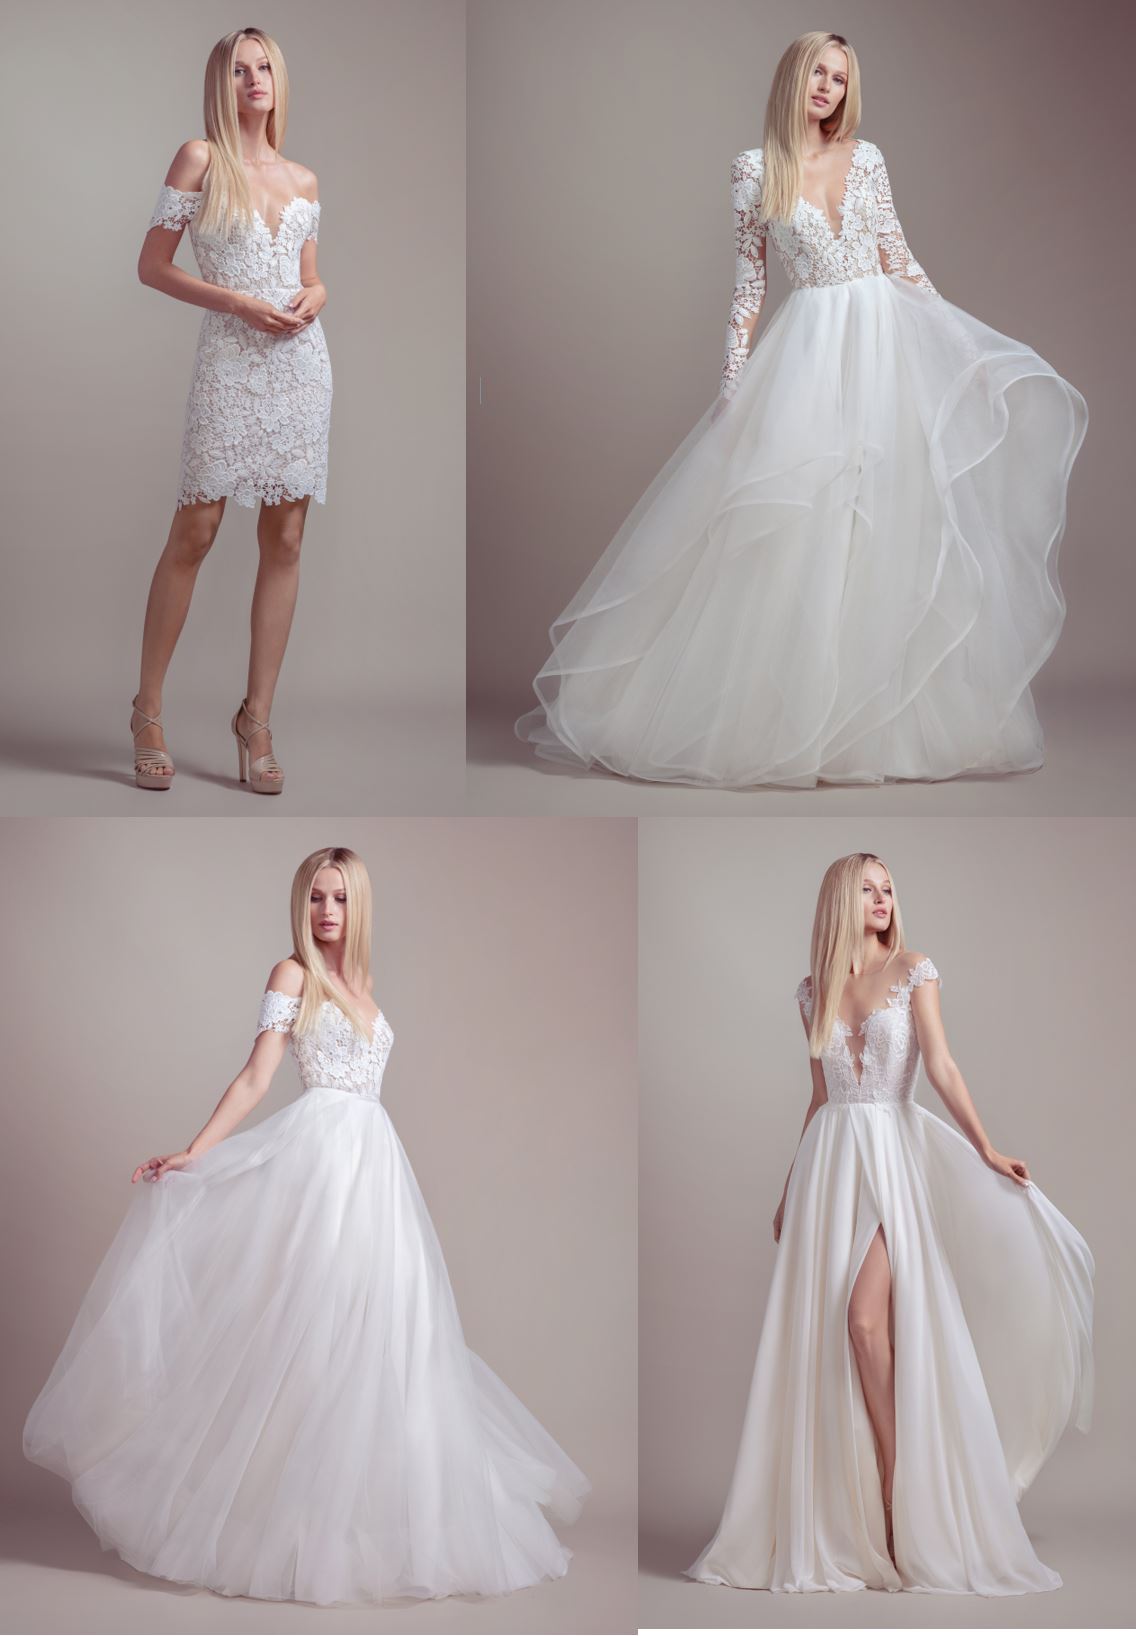 Blush by Hayley Paige Bridal Trunk Show from July 12th to 13th at Lotus Bridal Long Island, NY - Wedding Dresses Include Praise, Jojo, Charm, Atlas, Drai and Phoenix